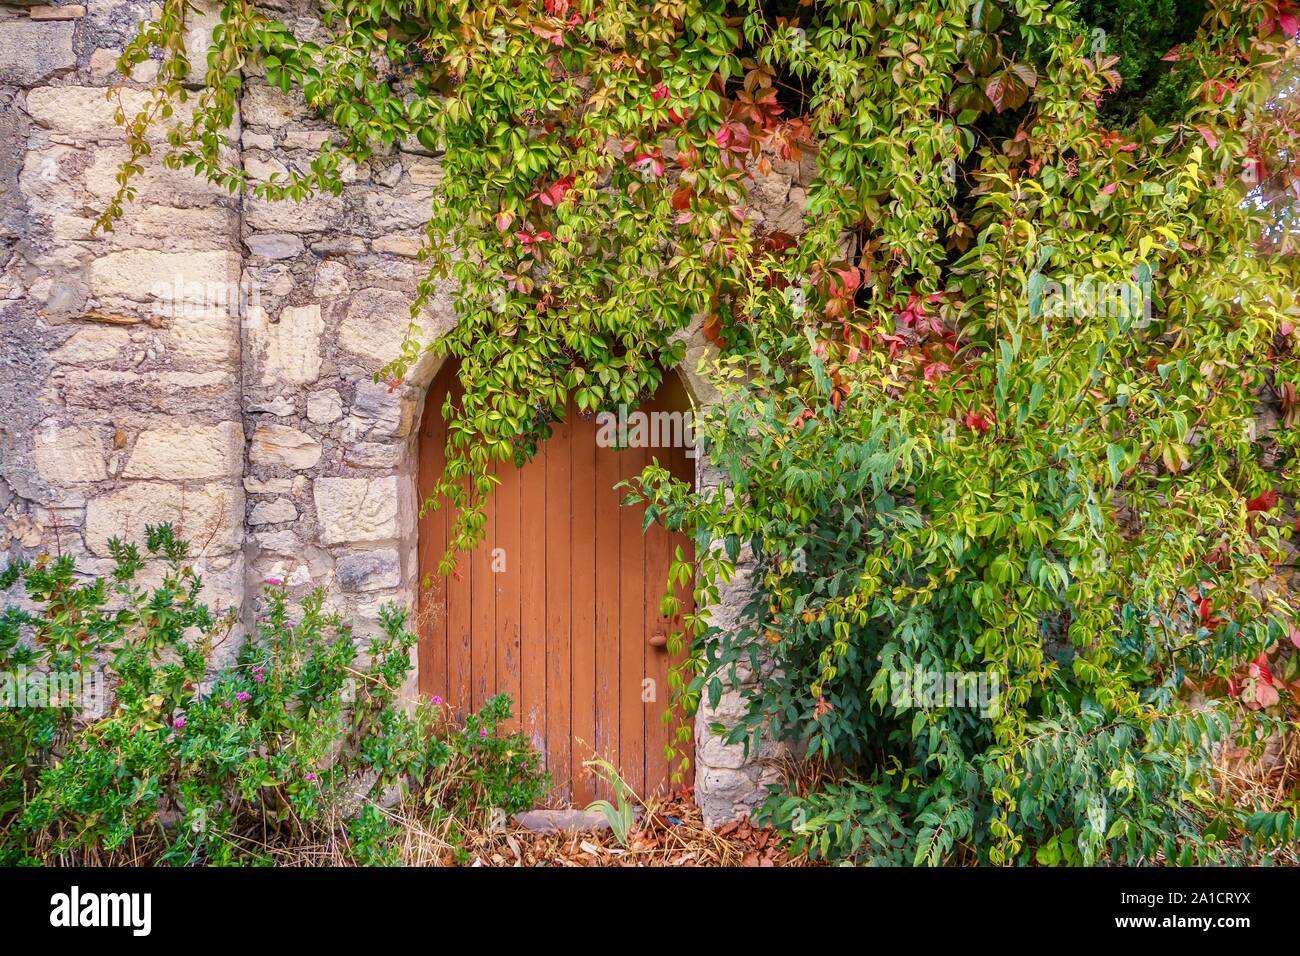 Street view of an old stone house entrance in Provence, France, where a vintage round top door and wall are partially covered by pretty climbing vines Stock Photo